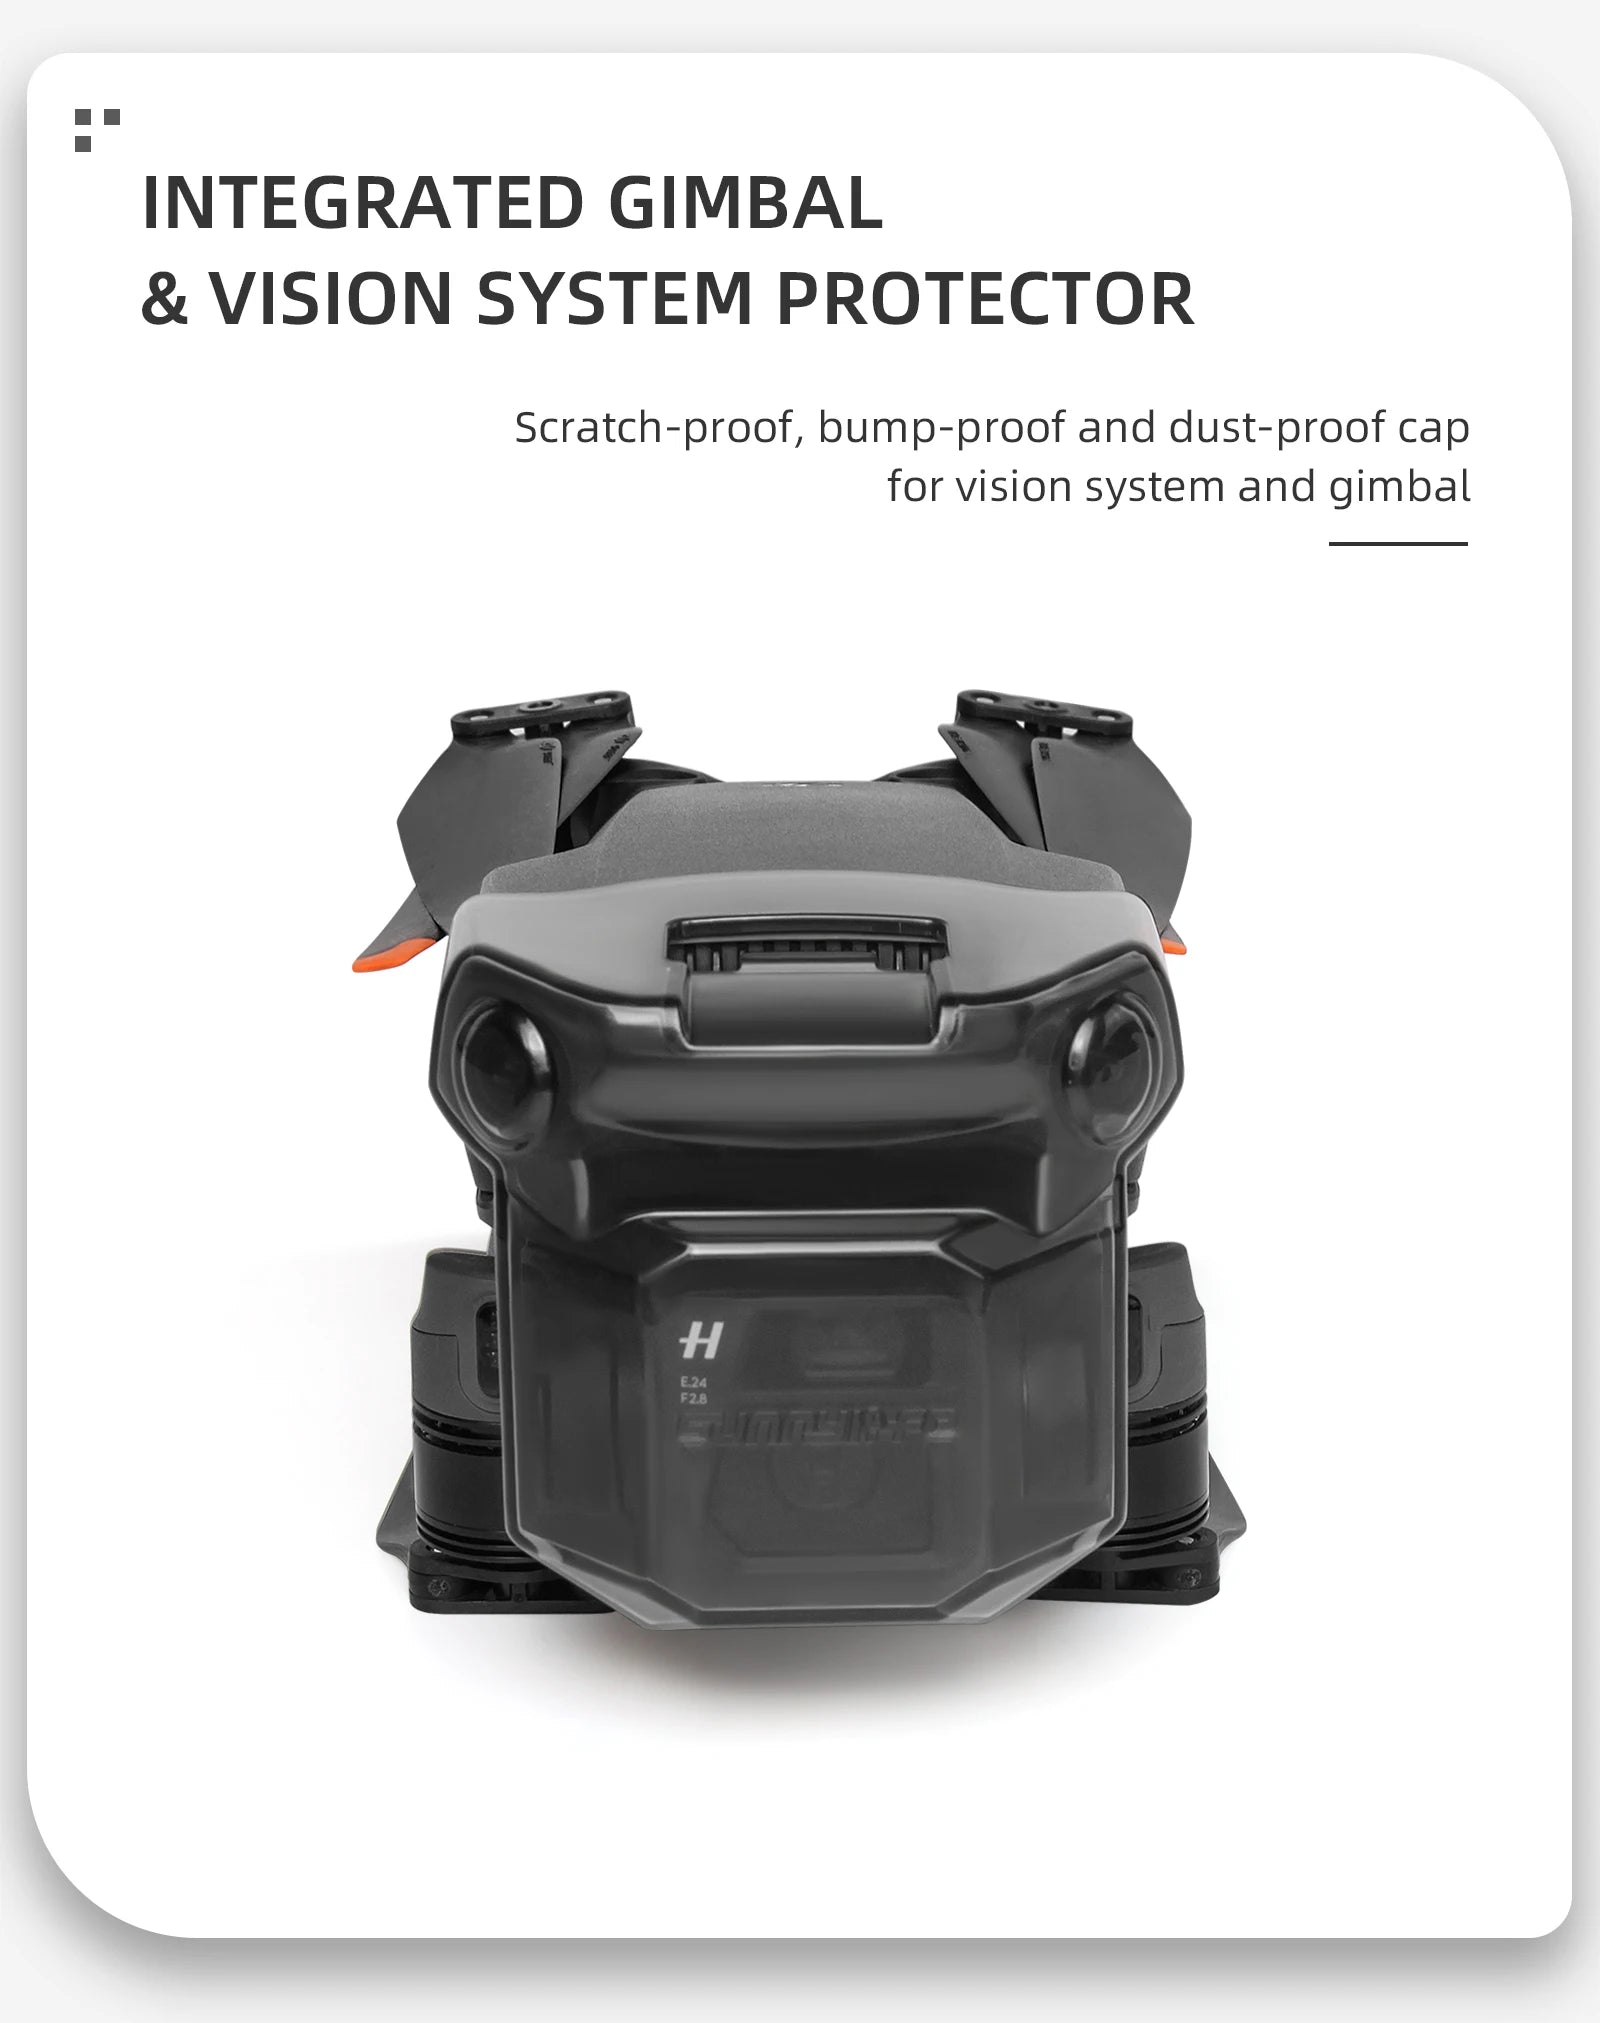 INTEGRATED GIMBAL & VISION SYSTEM PROTEC